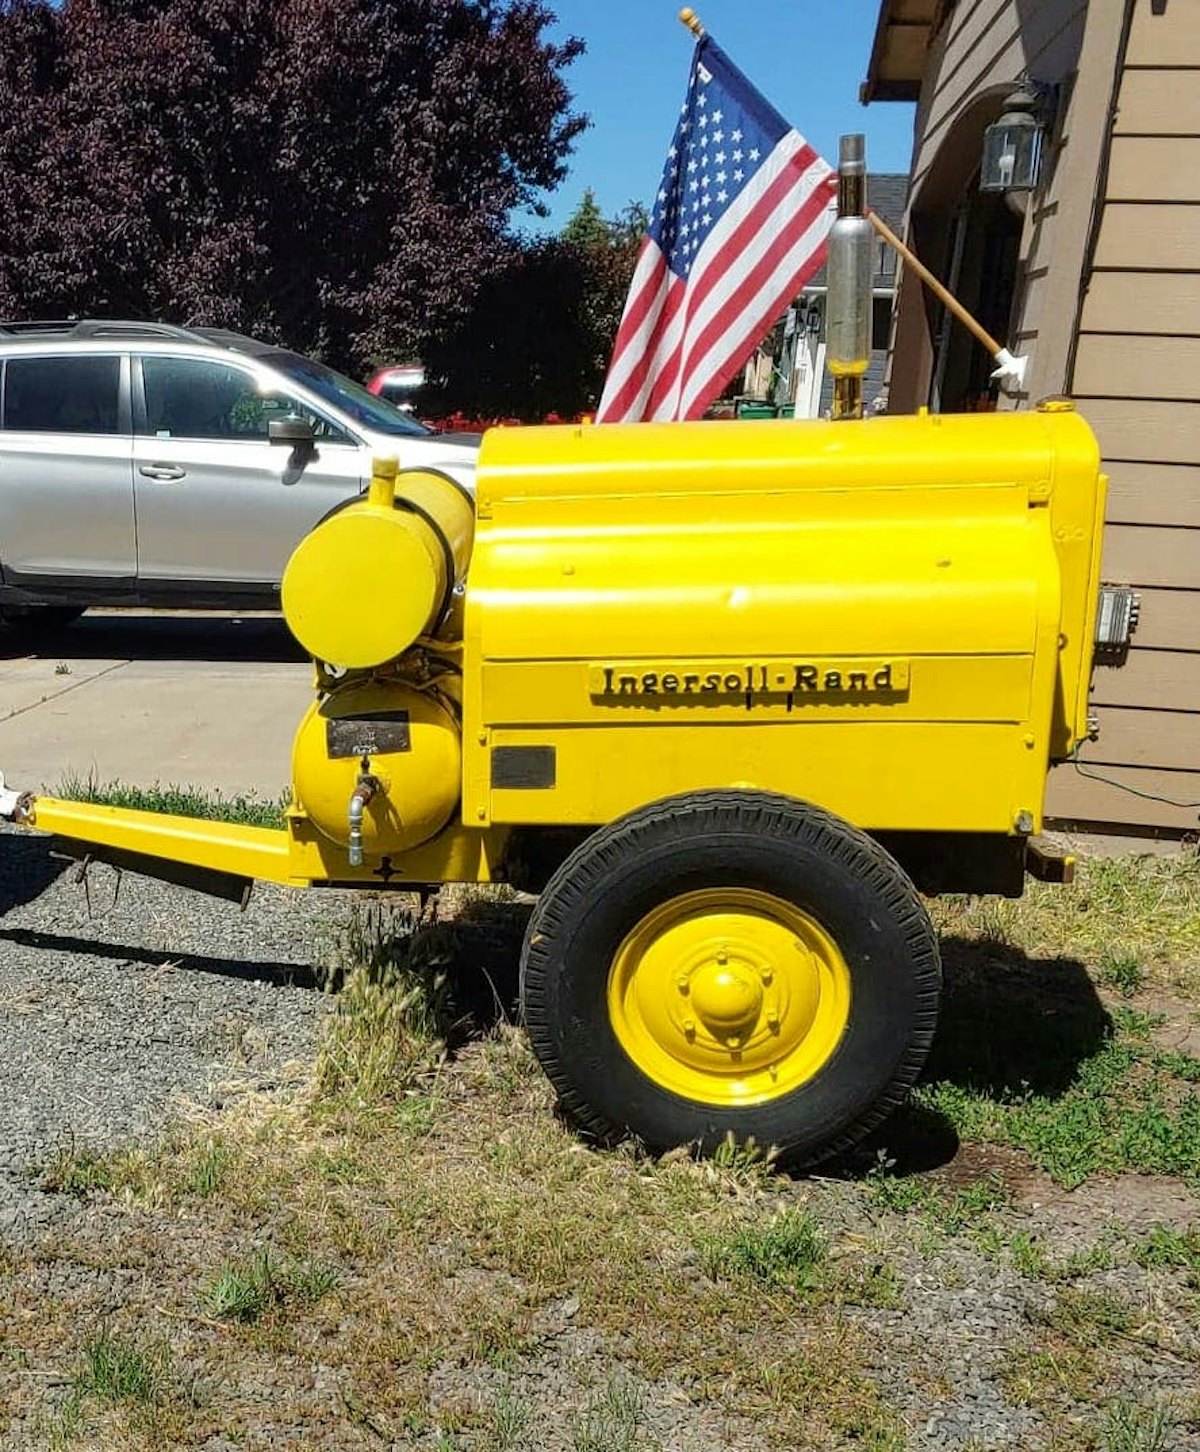 https://img.equipmentworld.com/files/base/randallreilly/all/image/2022/06/1943_Ingersoll_Rand_air_compressor_restored.62bb3aa3b8976.png?auto=format%2Ccompress&fit=max&q=70&w=1200